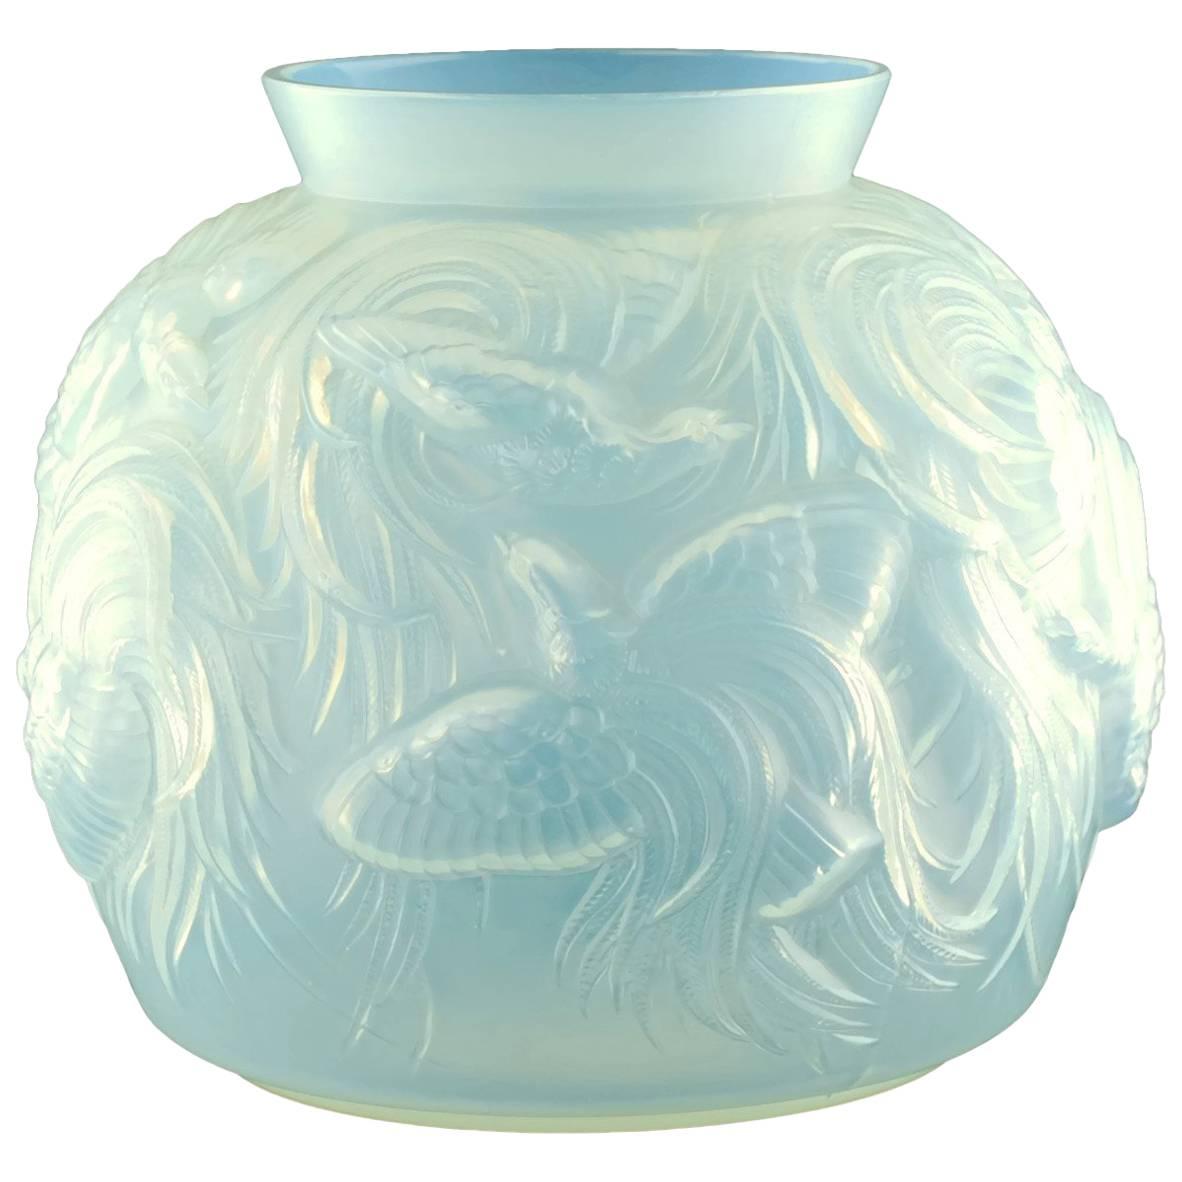 This large Art Deco opalescent art glass bowl was made by well regarded French glass manufacturer, Sabino. The piece has a globular form with a simple flared rim and features all-over molded decoration in the form of Birds of Paradise. Particular